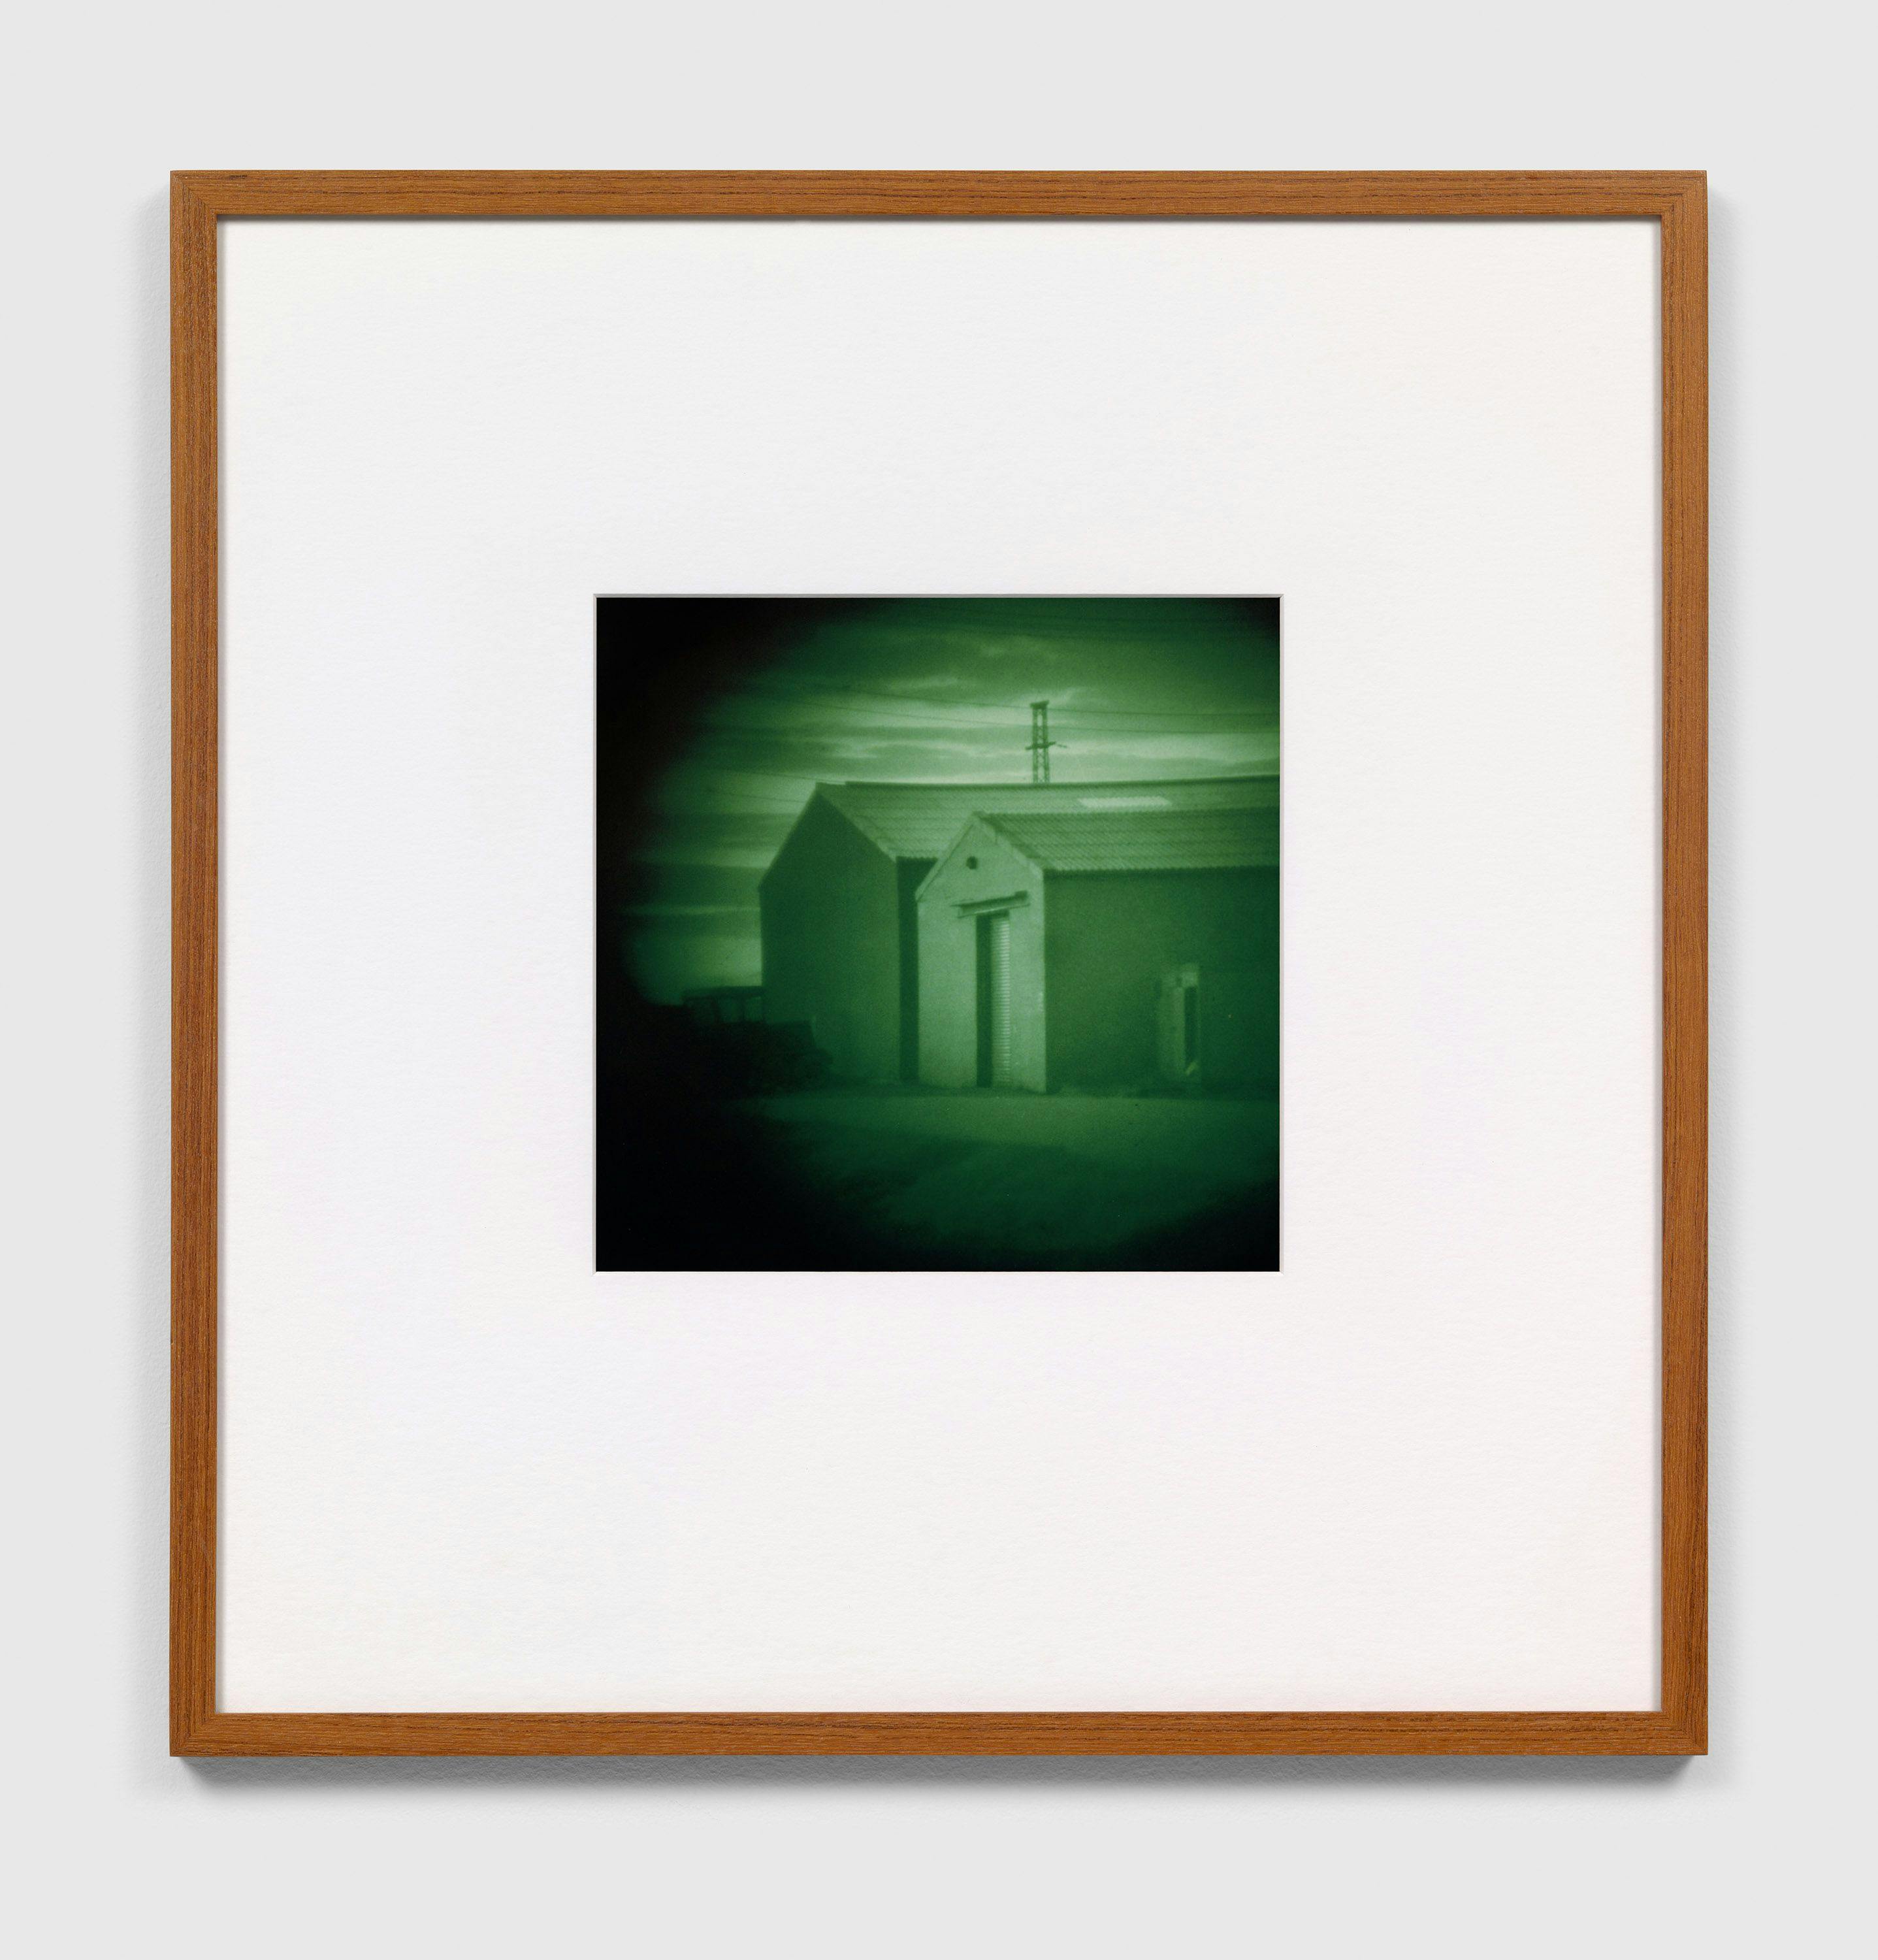 A photograph by Thomas Ruff, titled Nacht 7 I, dated 1992.